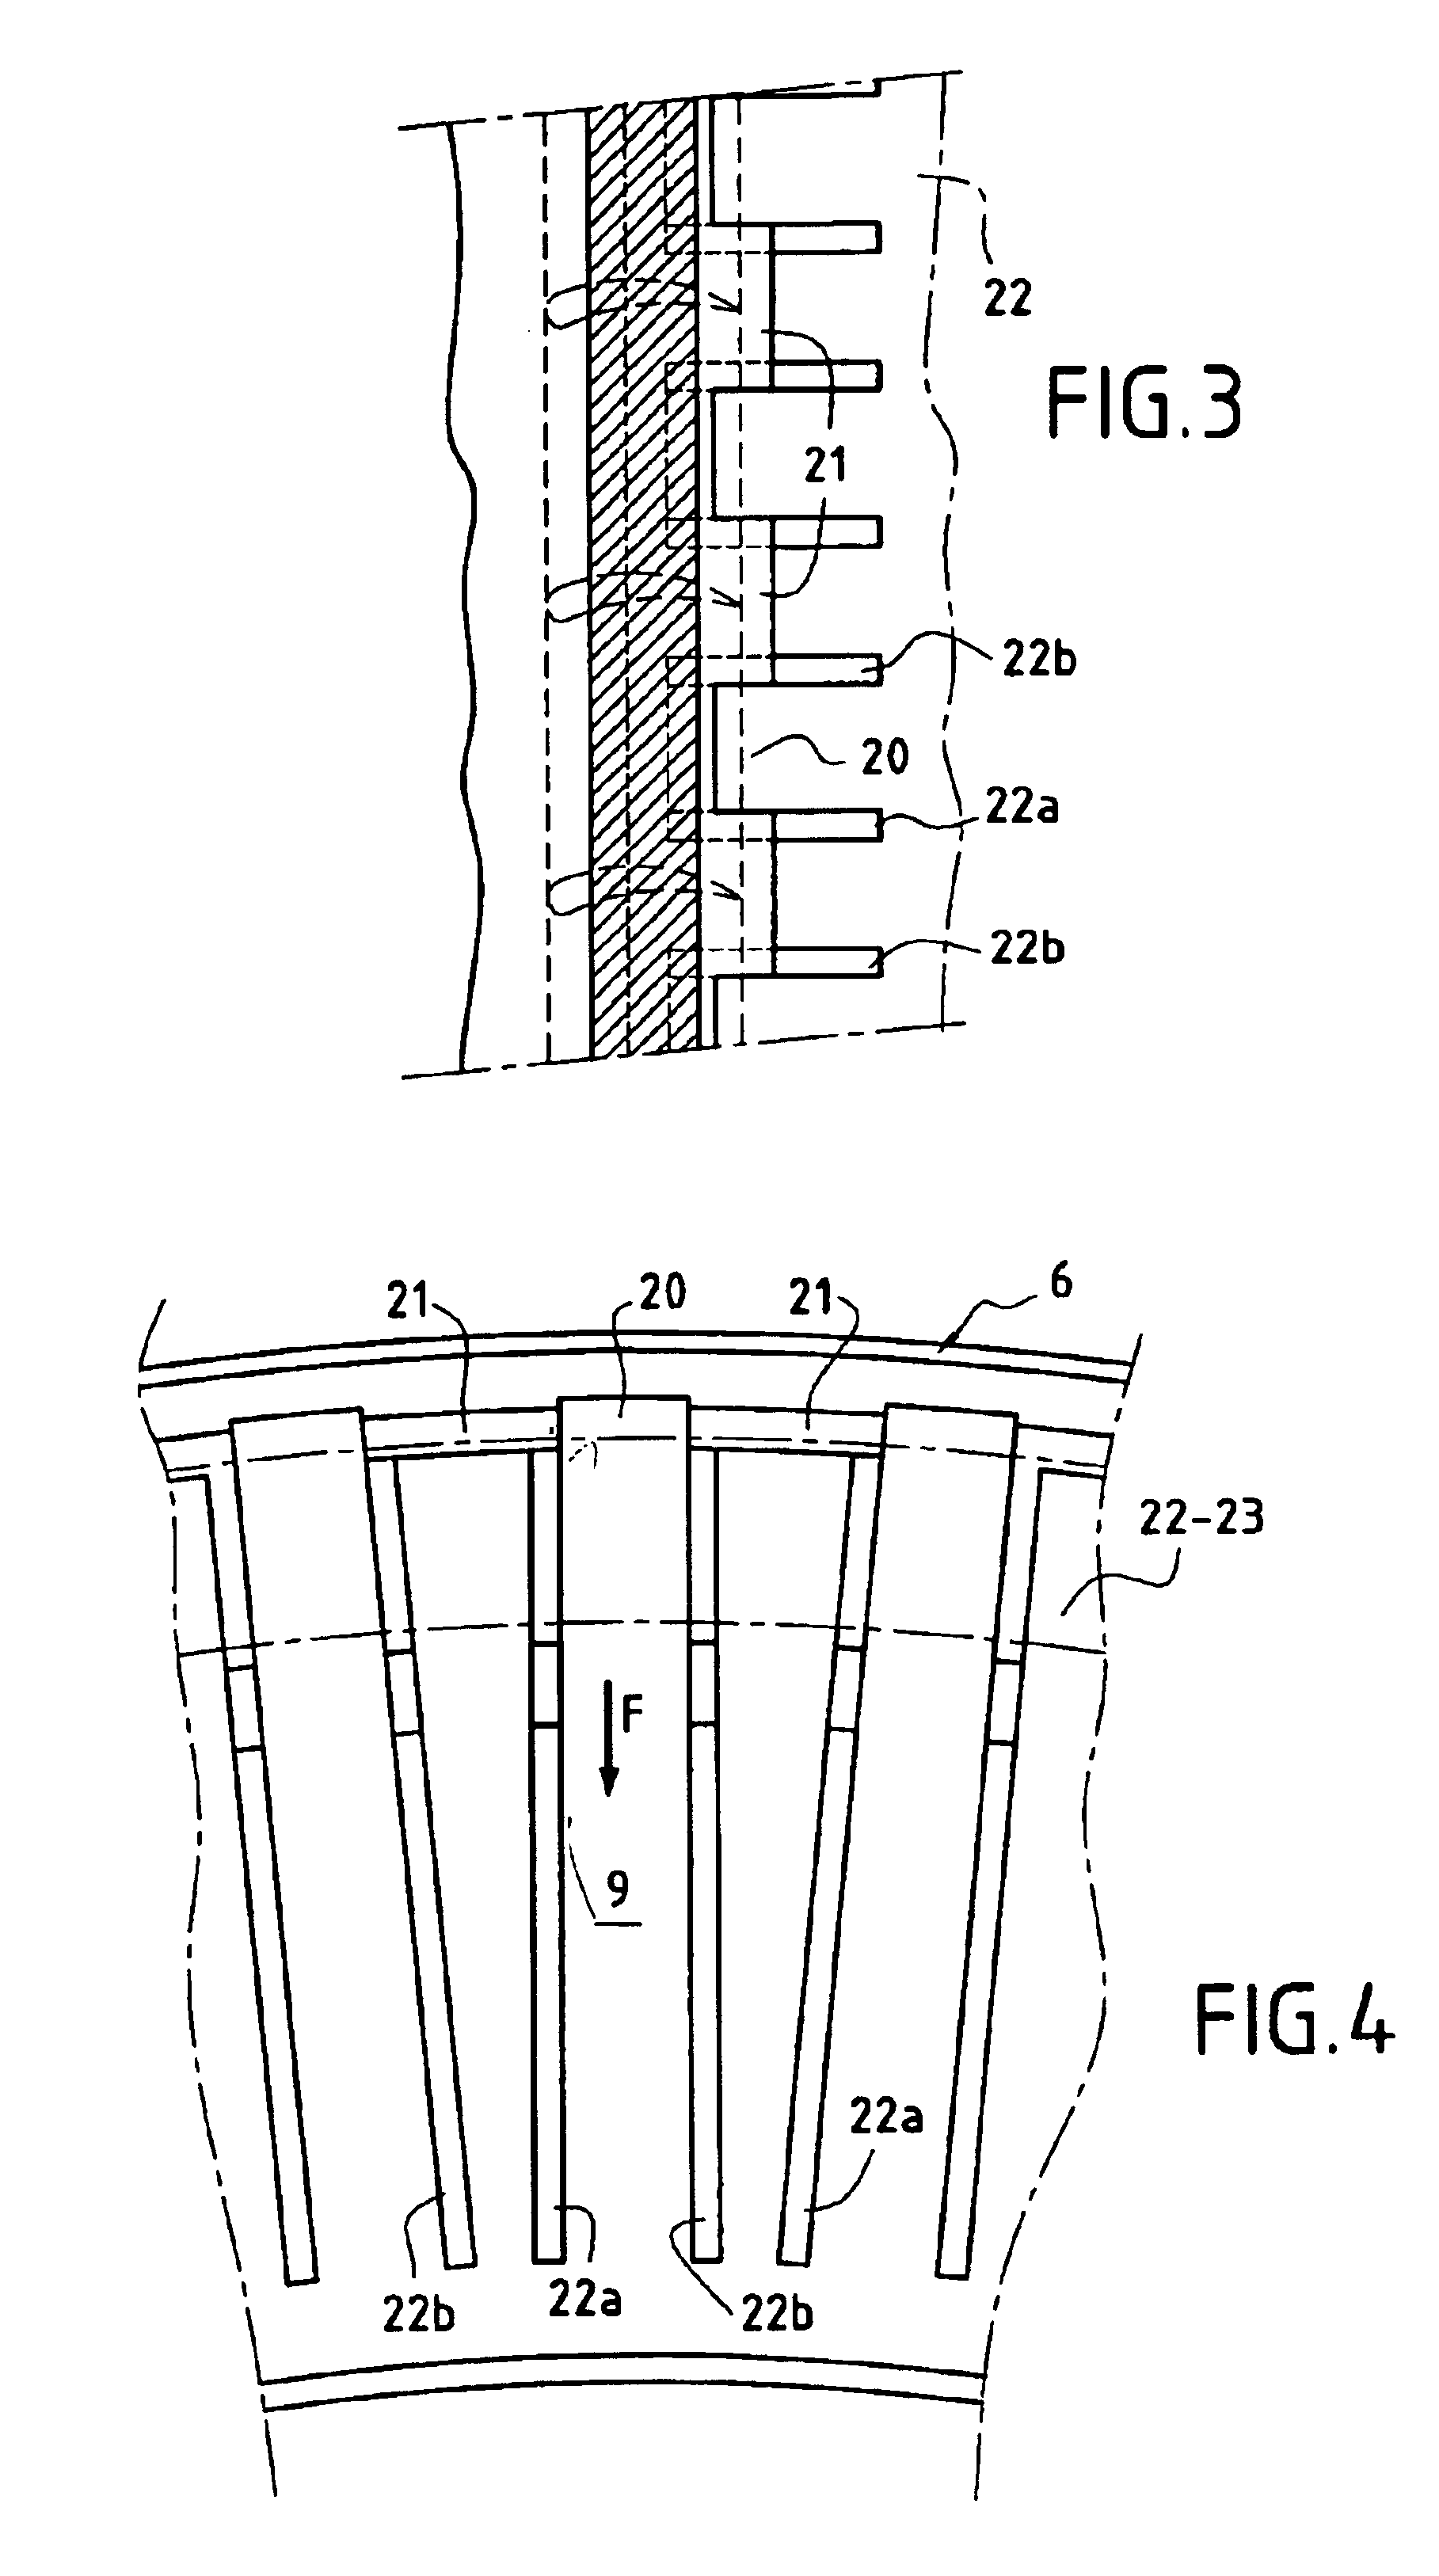 Axial compressor disk for a turbomachine with centripetal air bleed